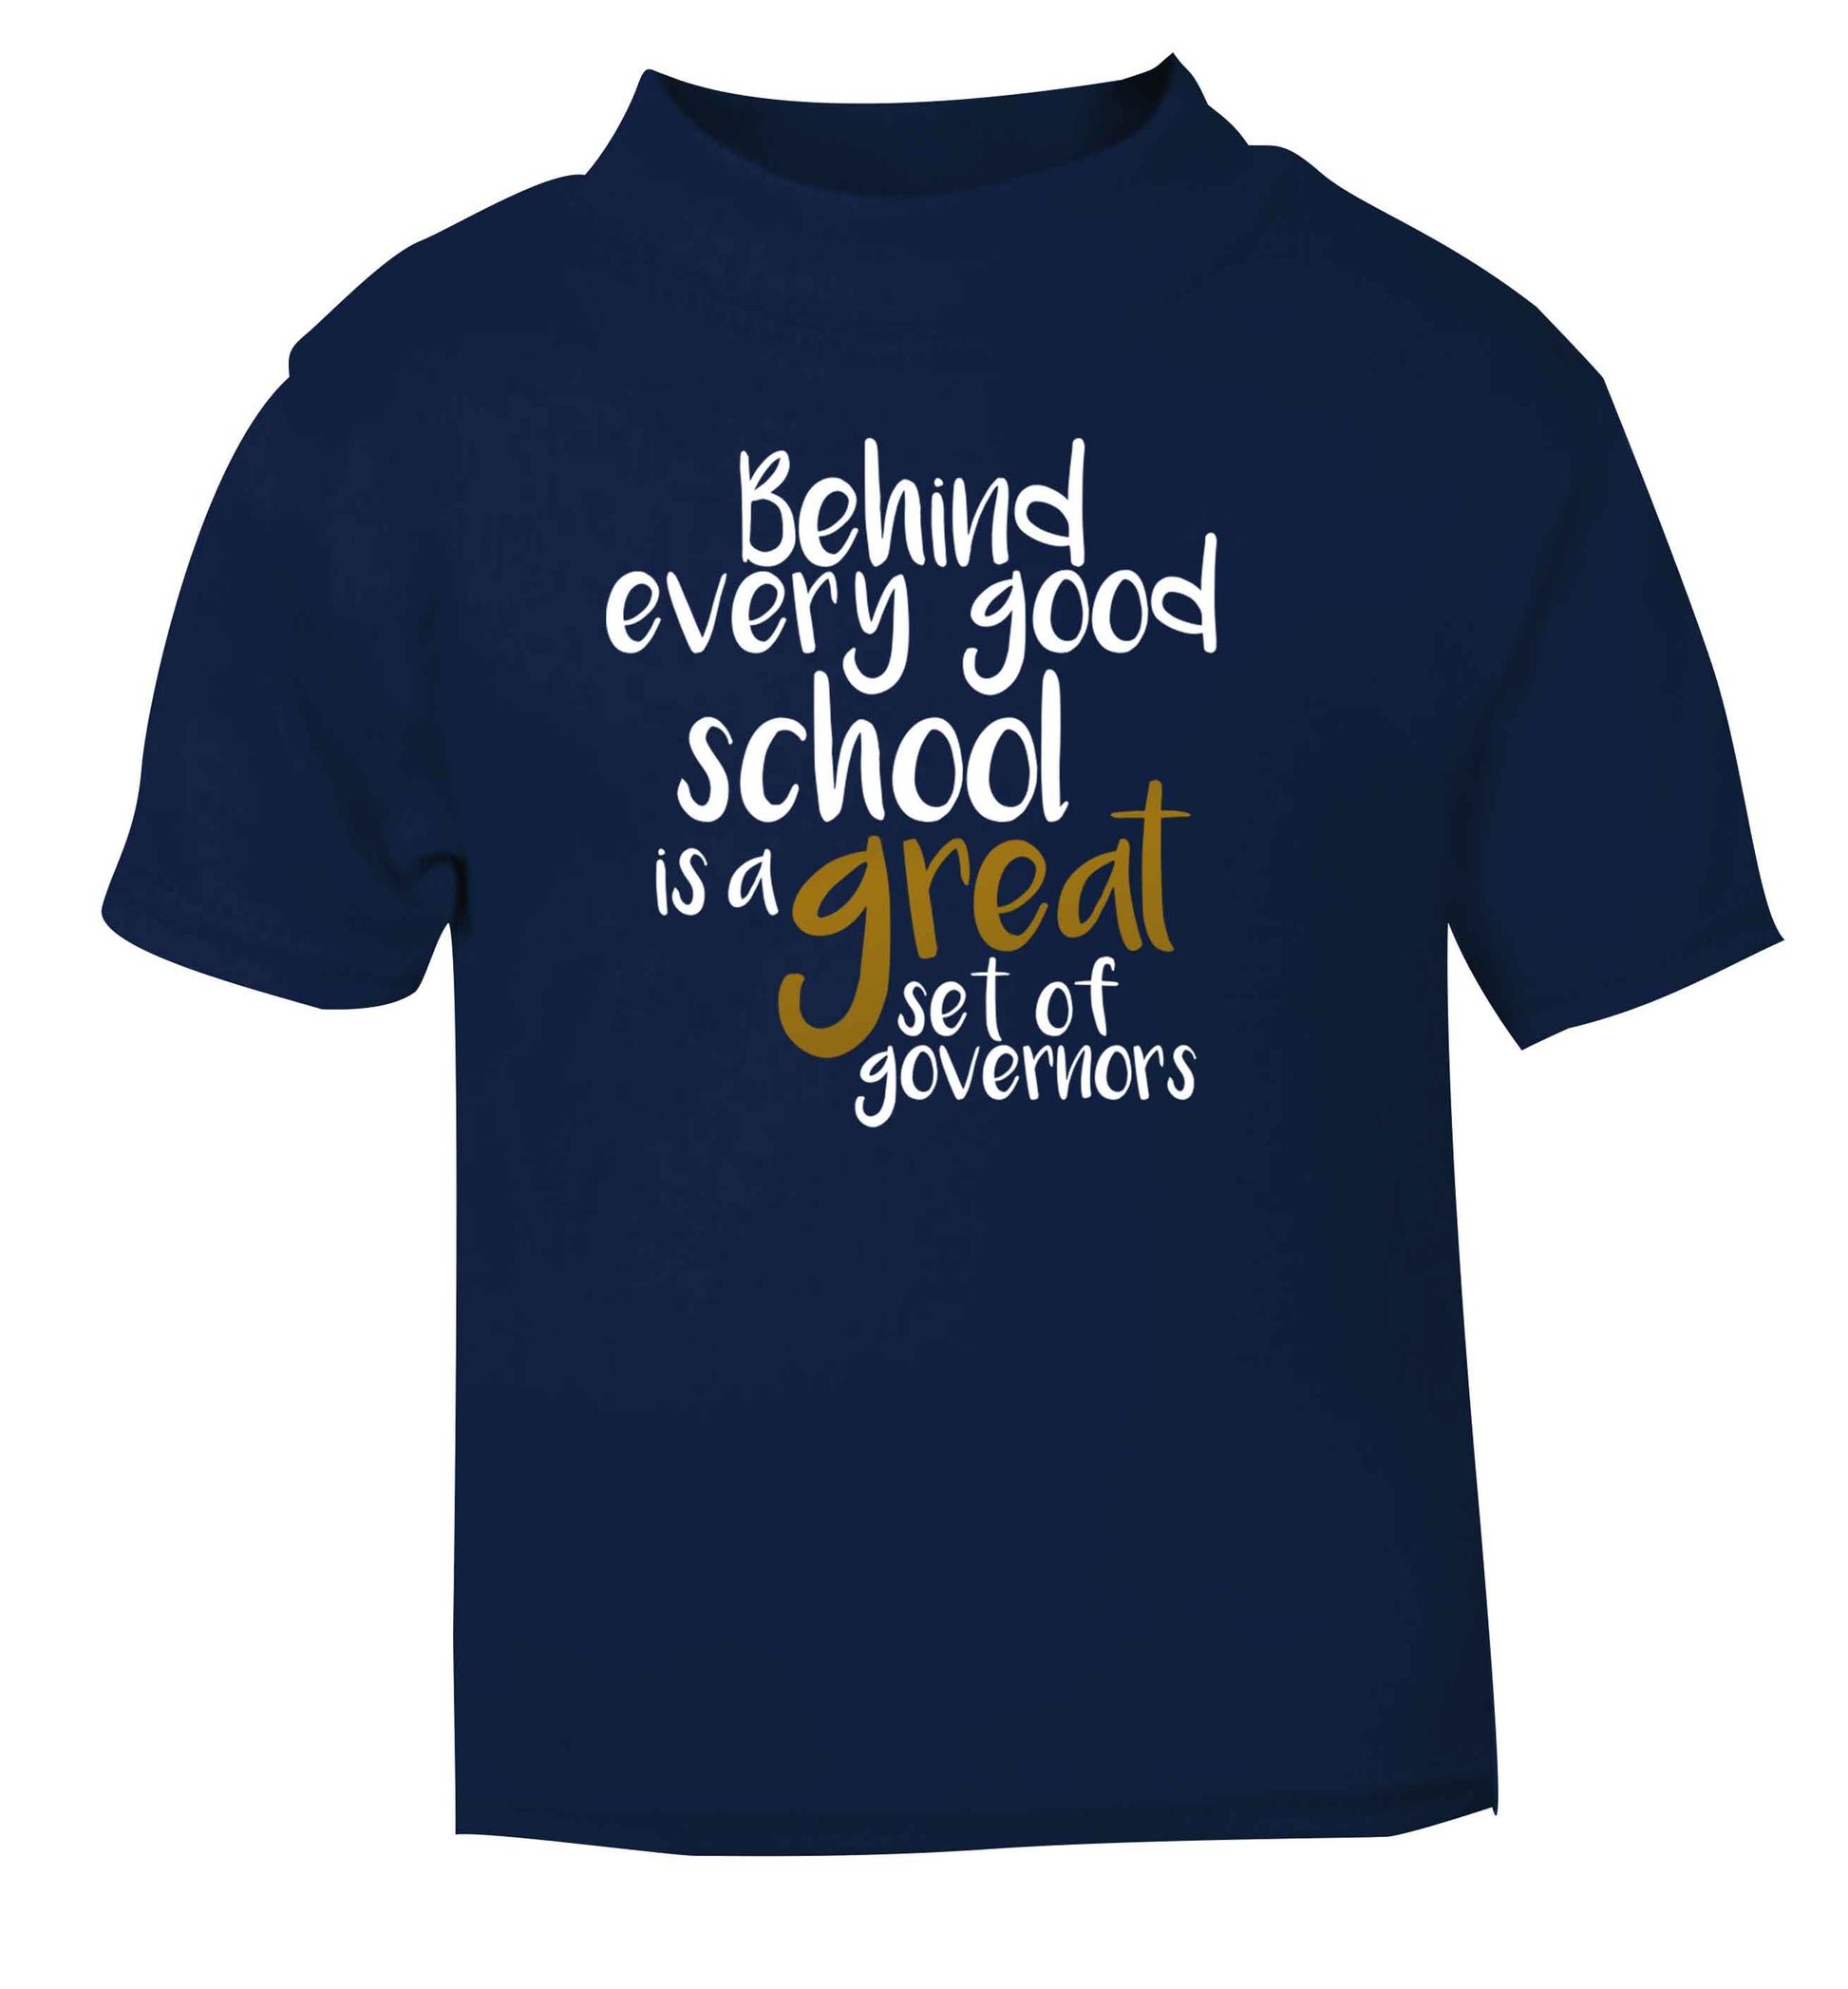 Behind every good school is a great set of governors navy Baby Toddler Tshirt 2 Years